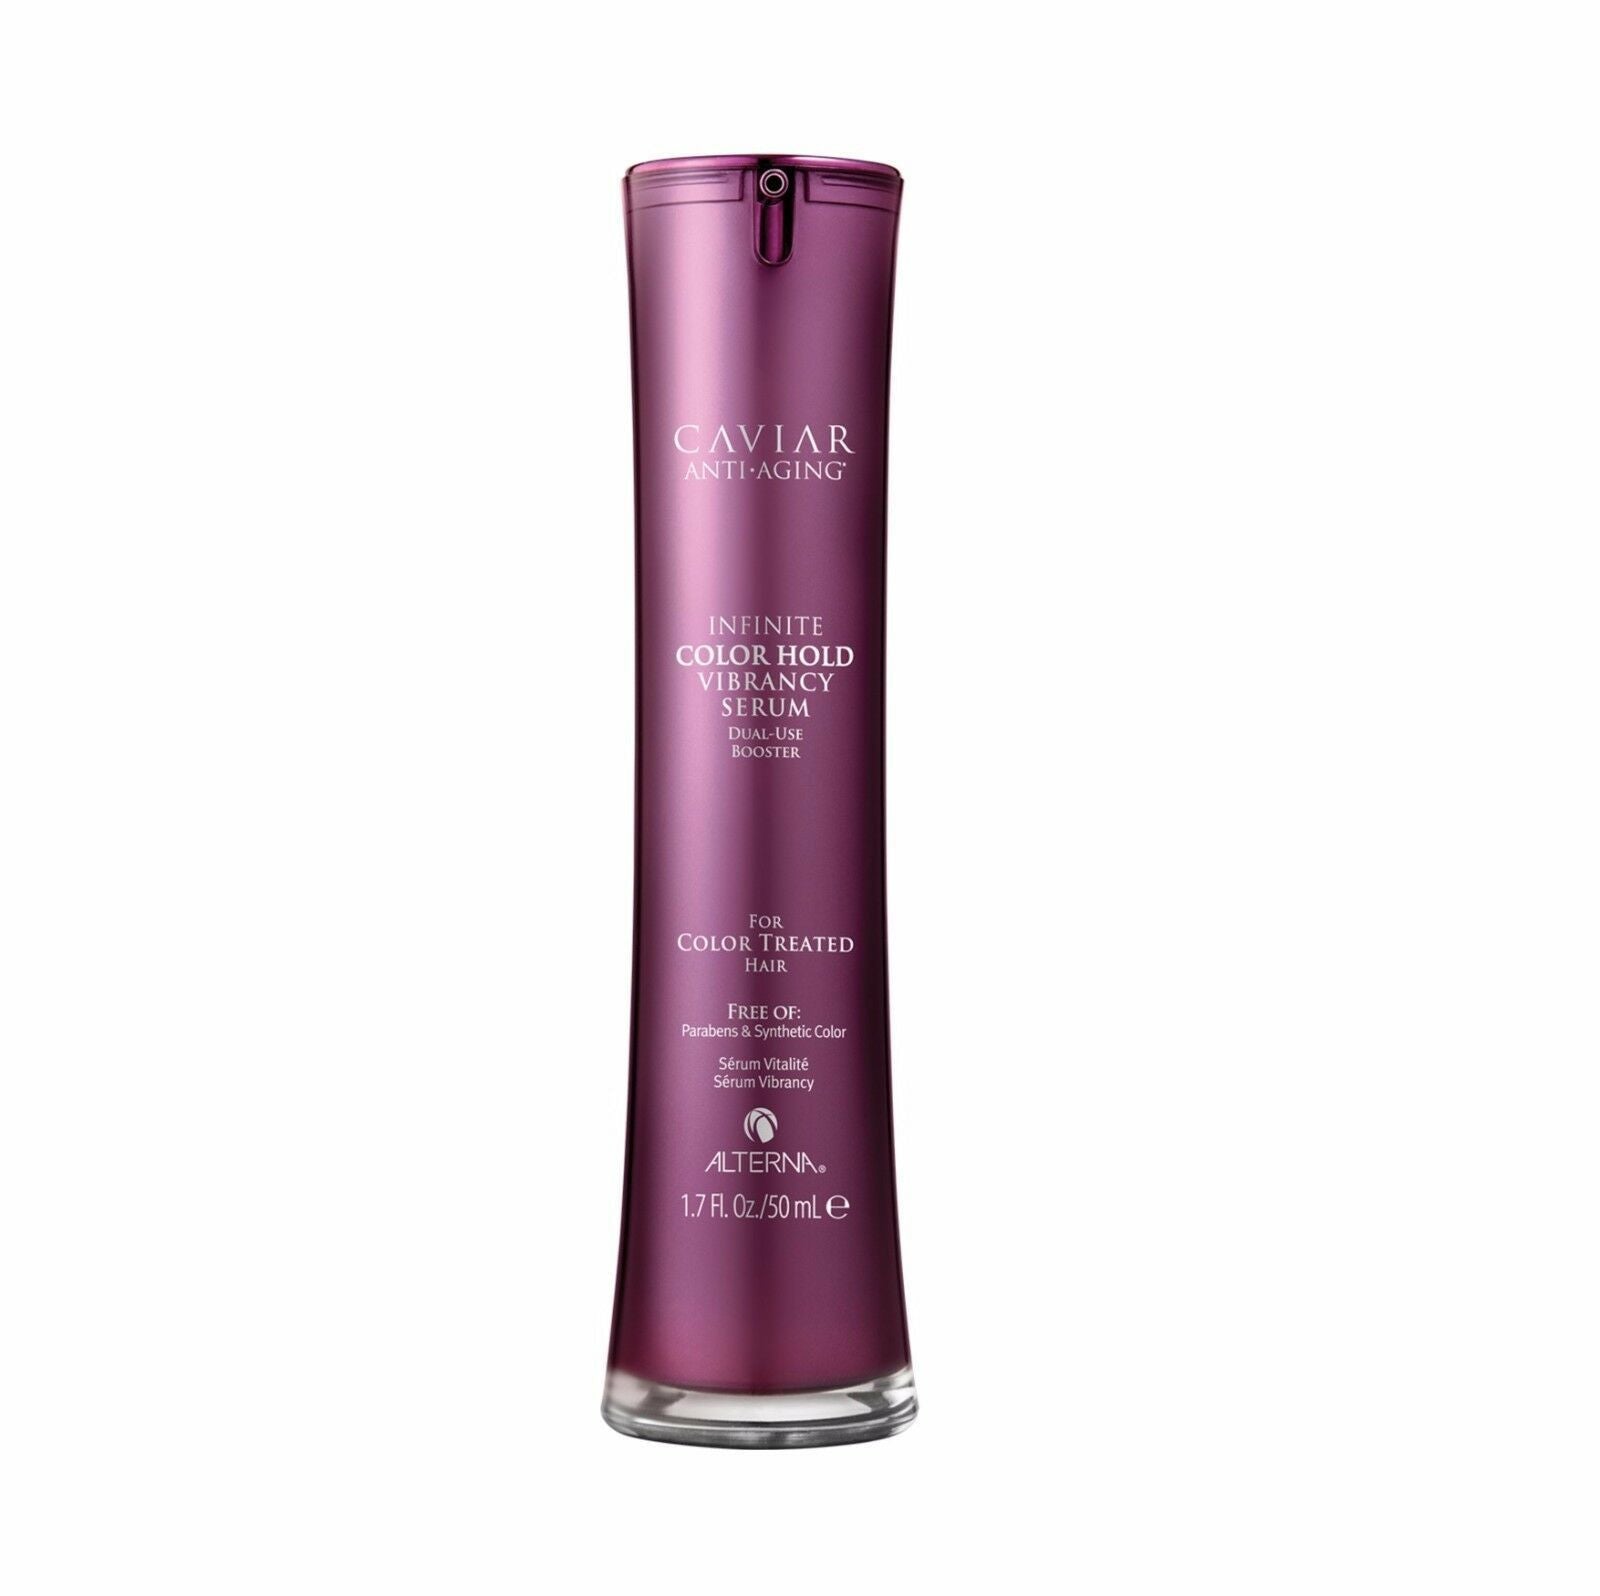 iaahhaircare,Alterna Caviar Anti-Aging Infinite Color Hold Vibrancy Serum 50ml,Anti-Aging Products,Alterna